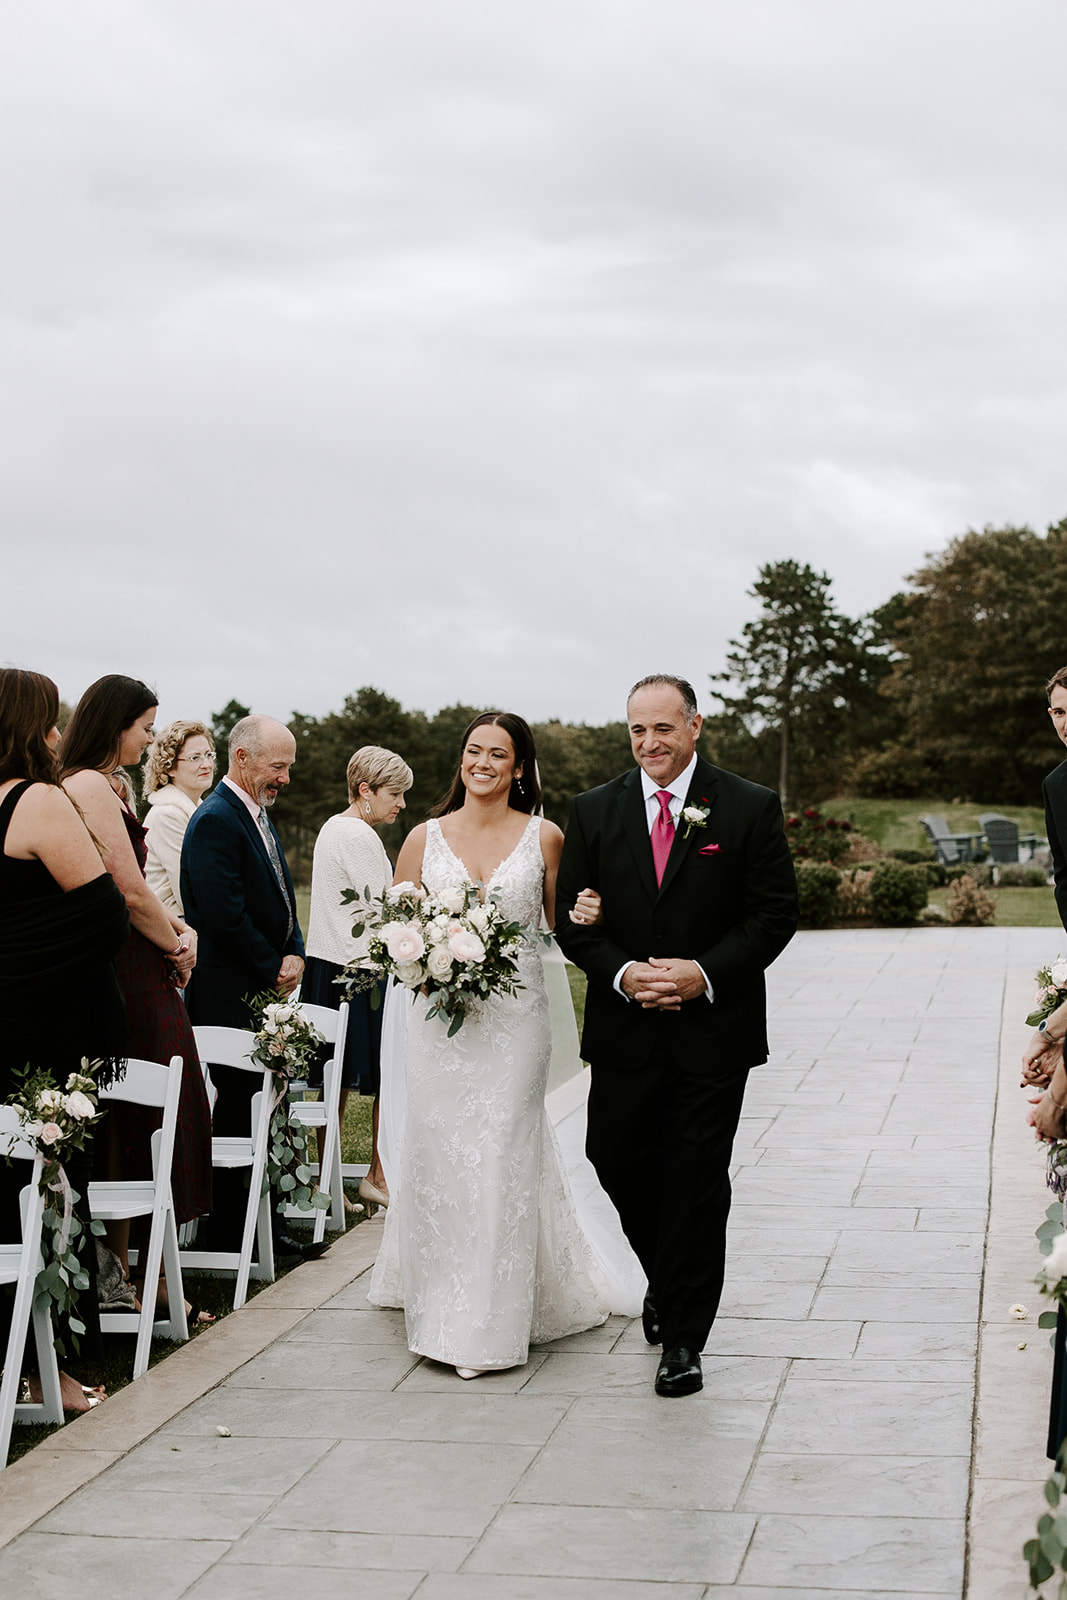 Stunning bride enters her perfect New England wedding day